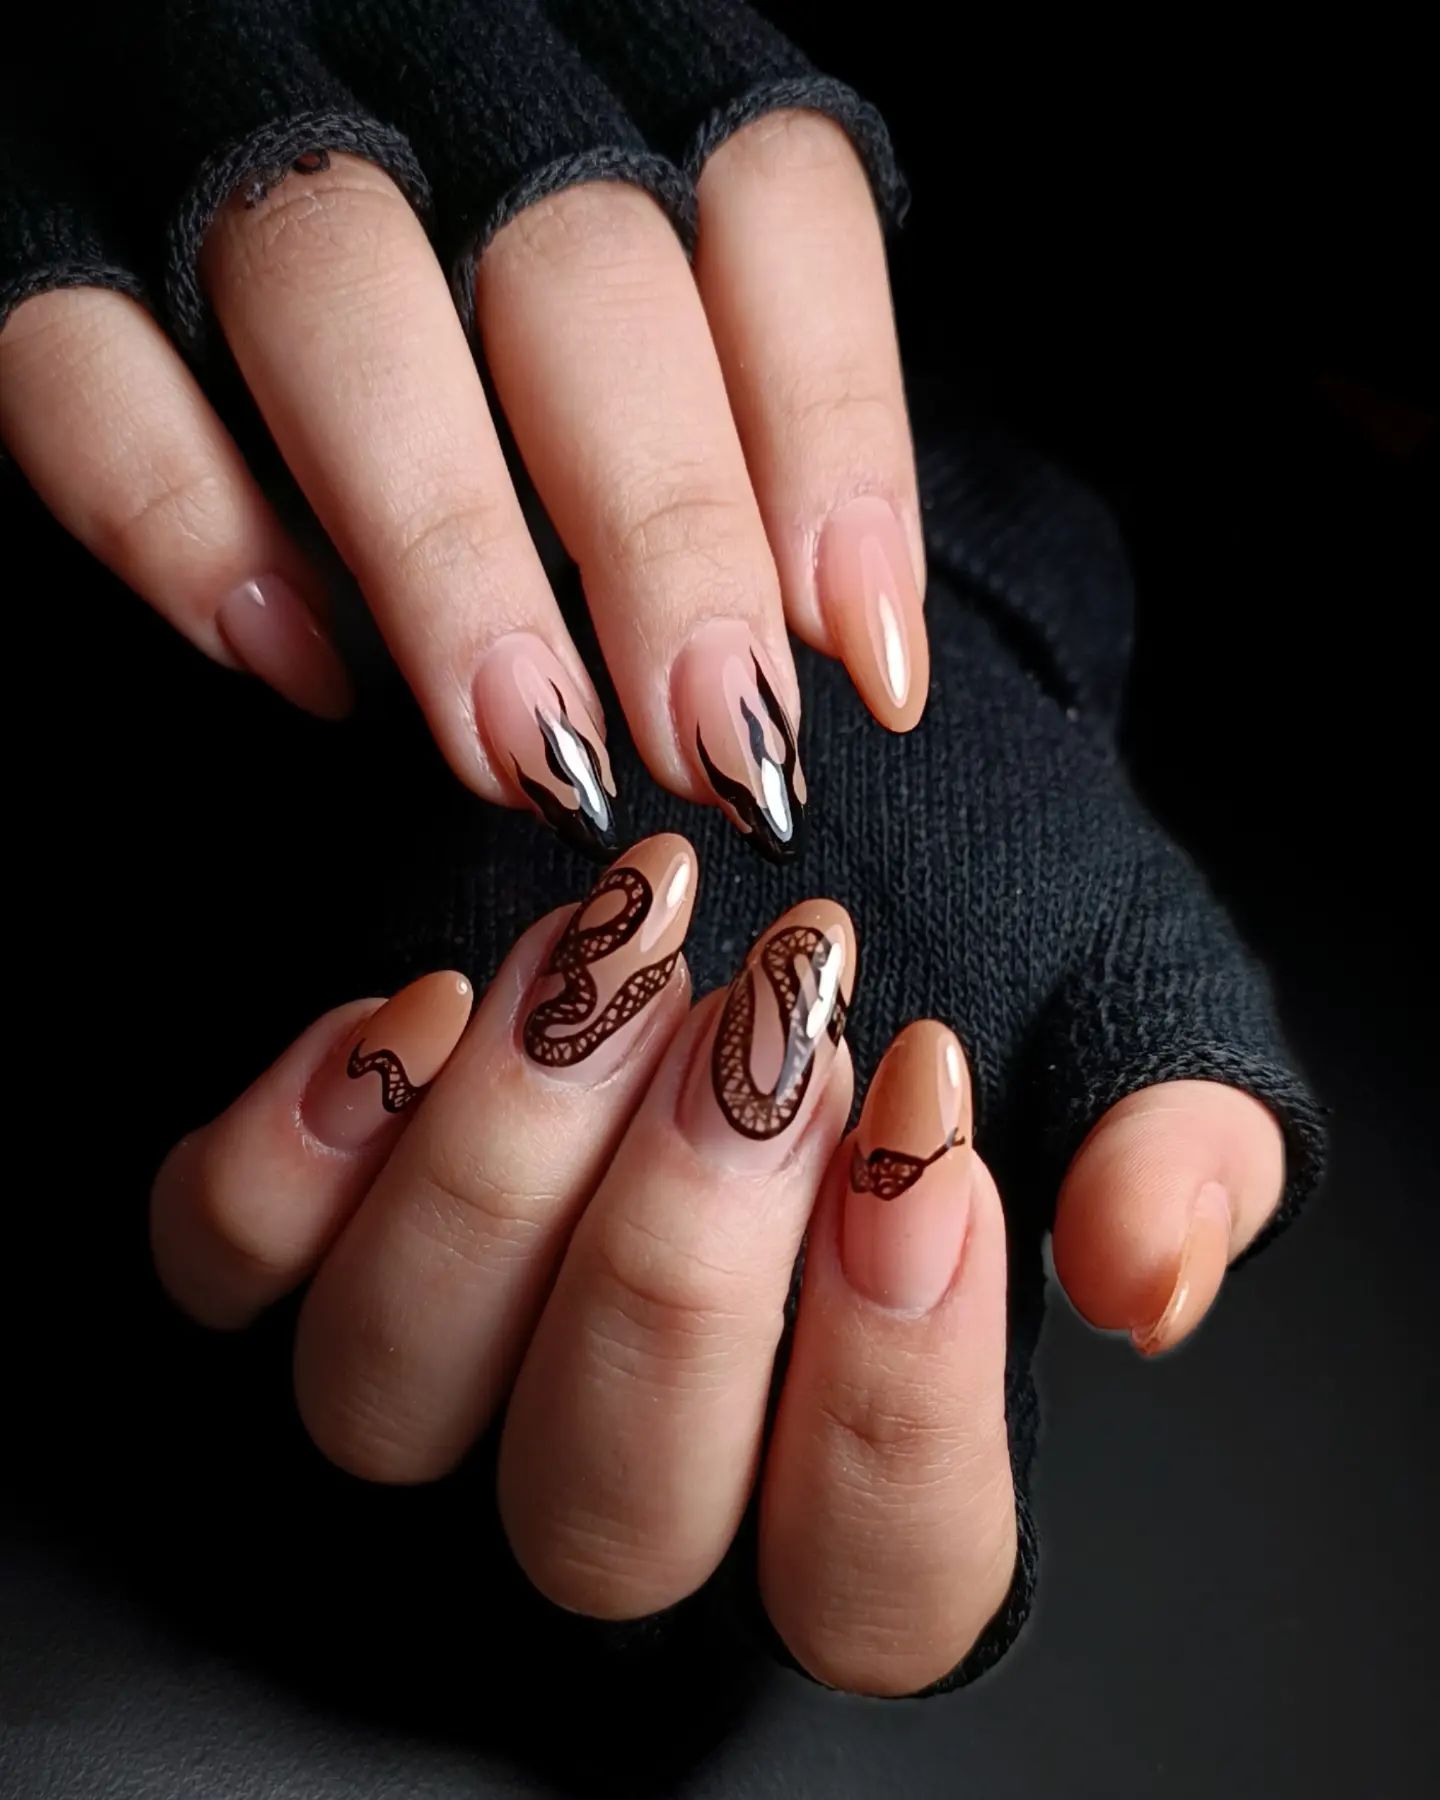 Goth nude nails